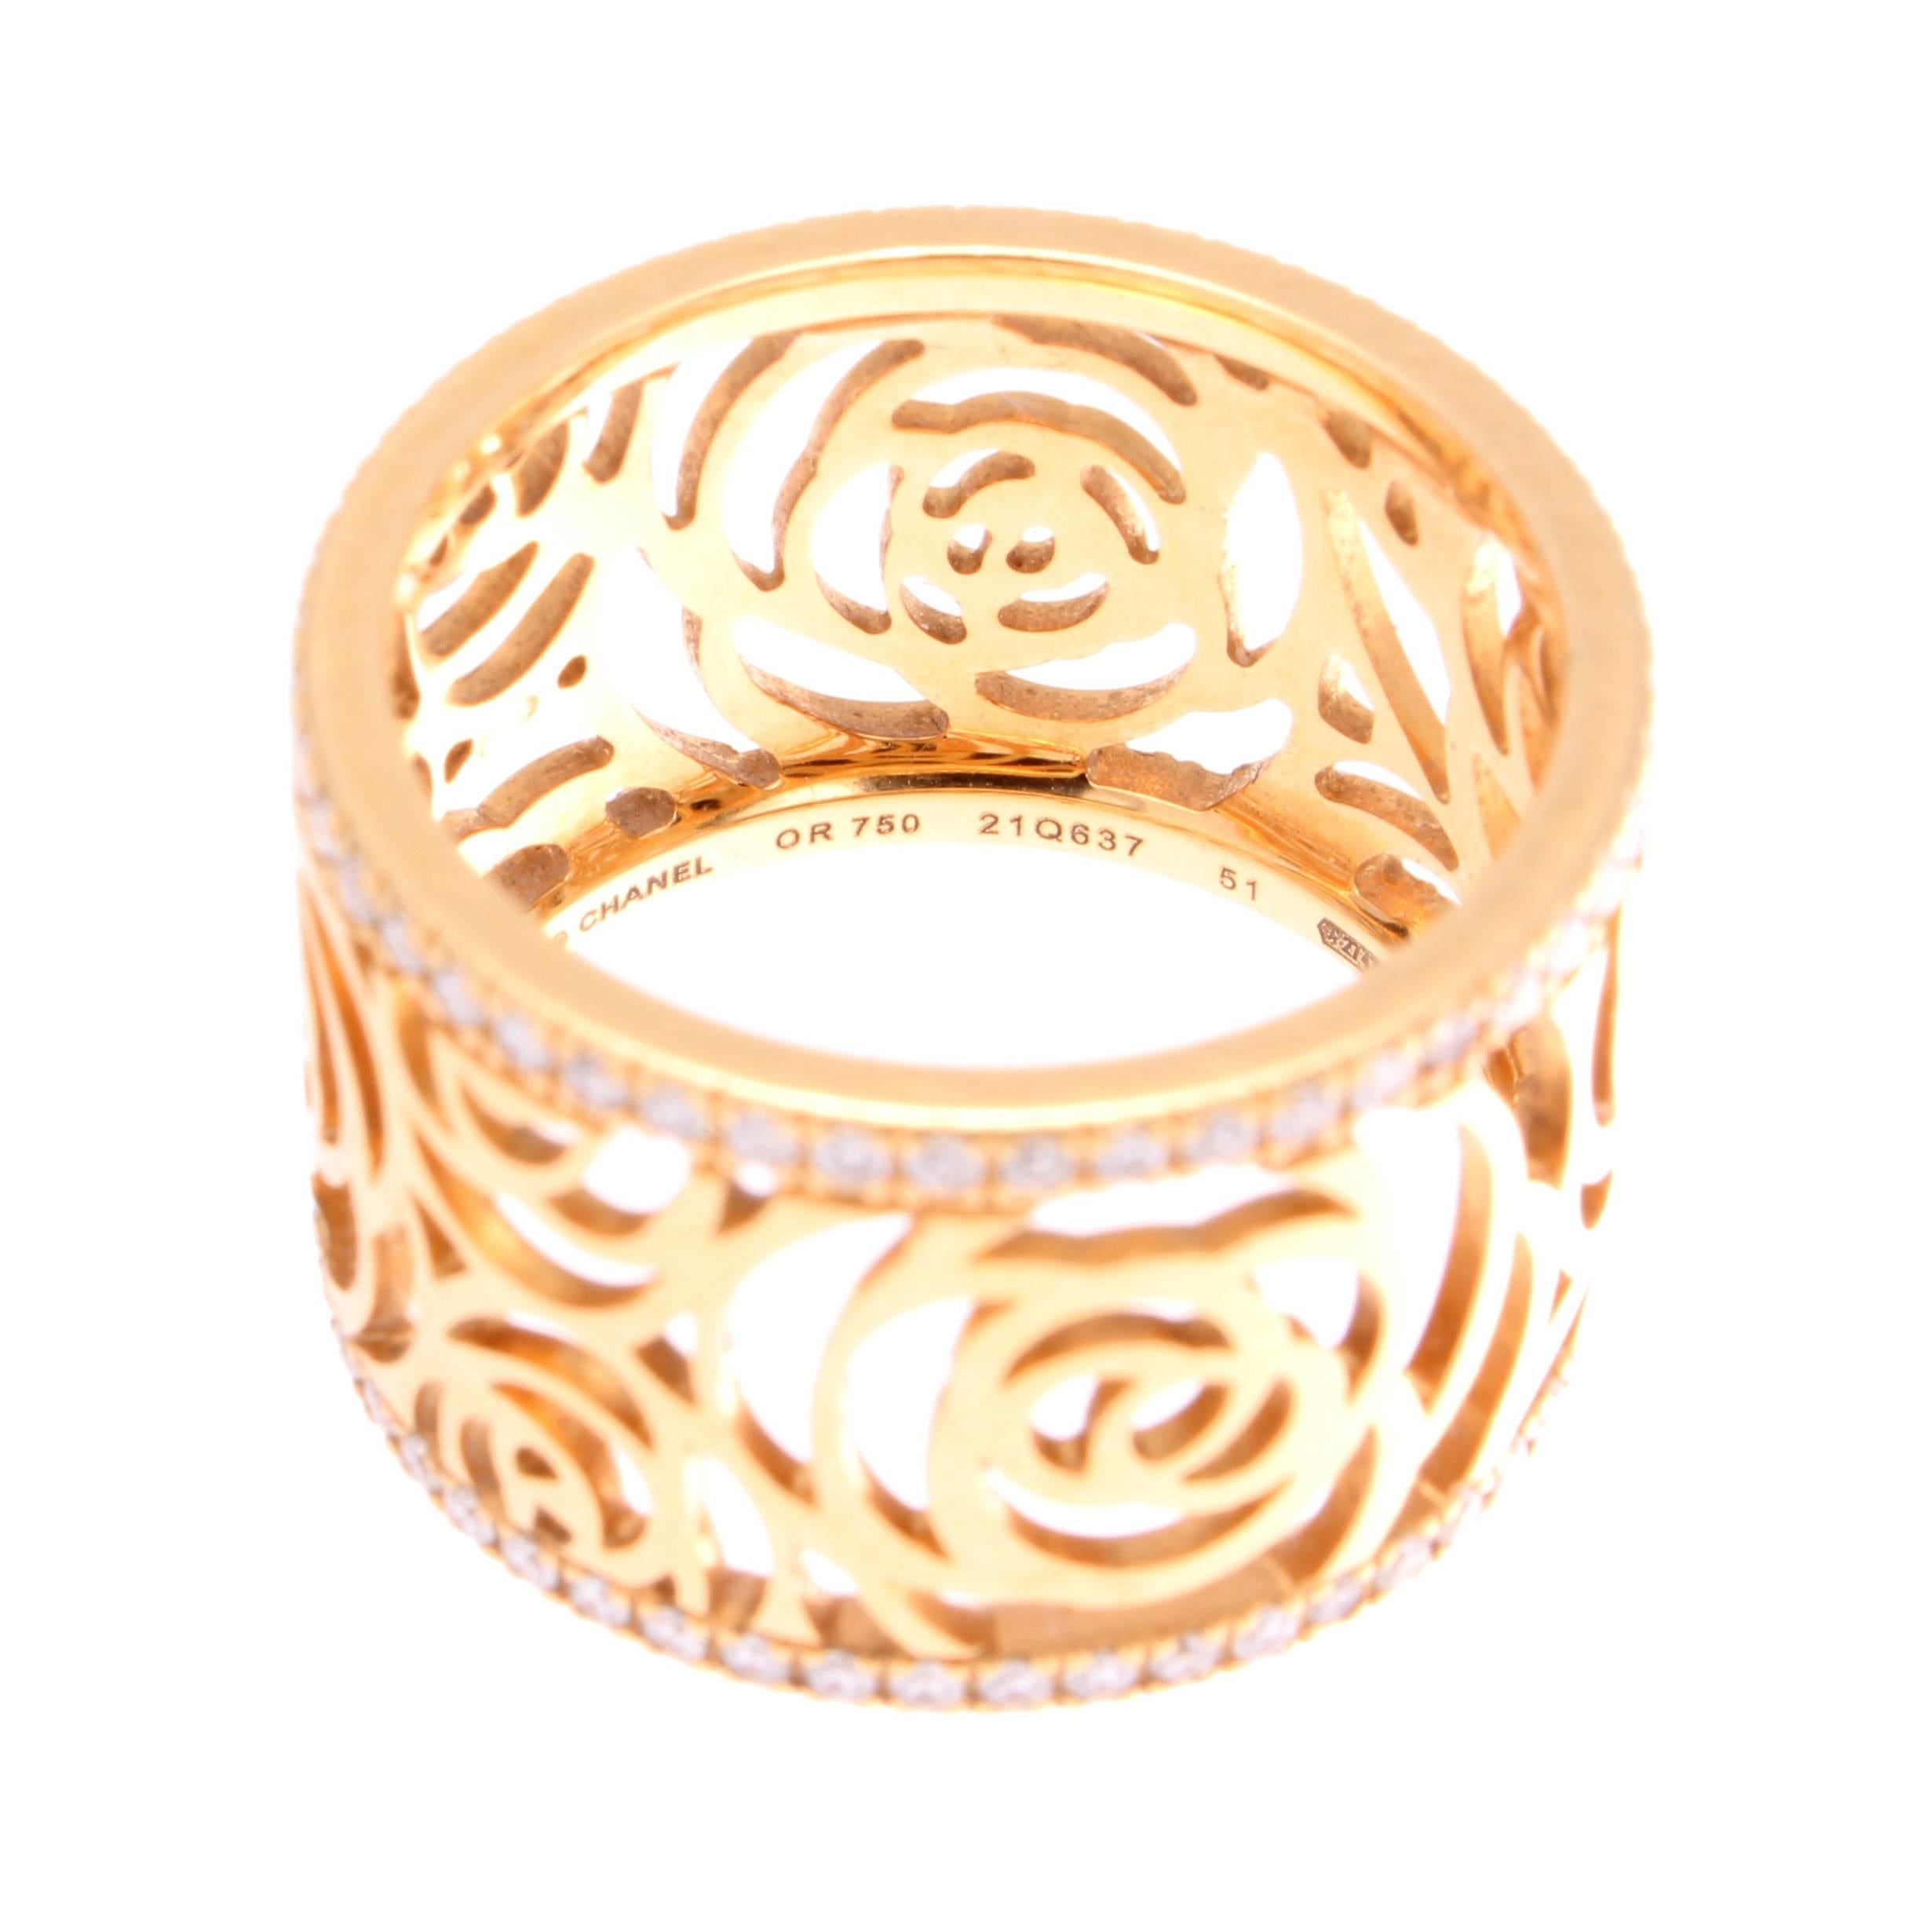 A delicately crafted ring by Chanel who always puts the emphasis on style. The ring displays a fabulous abstract design through empty space and finely crafted 18k gold which has been complimented by a  row of nearly colorless diamonds on either side